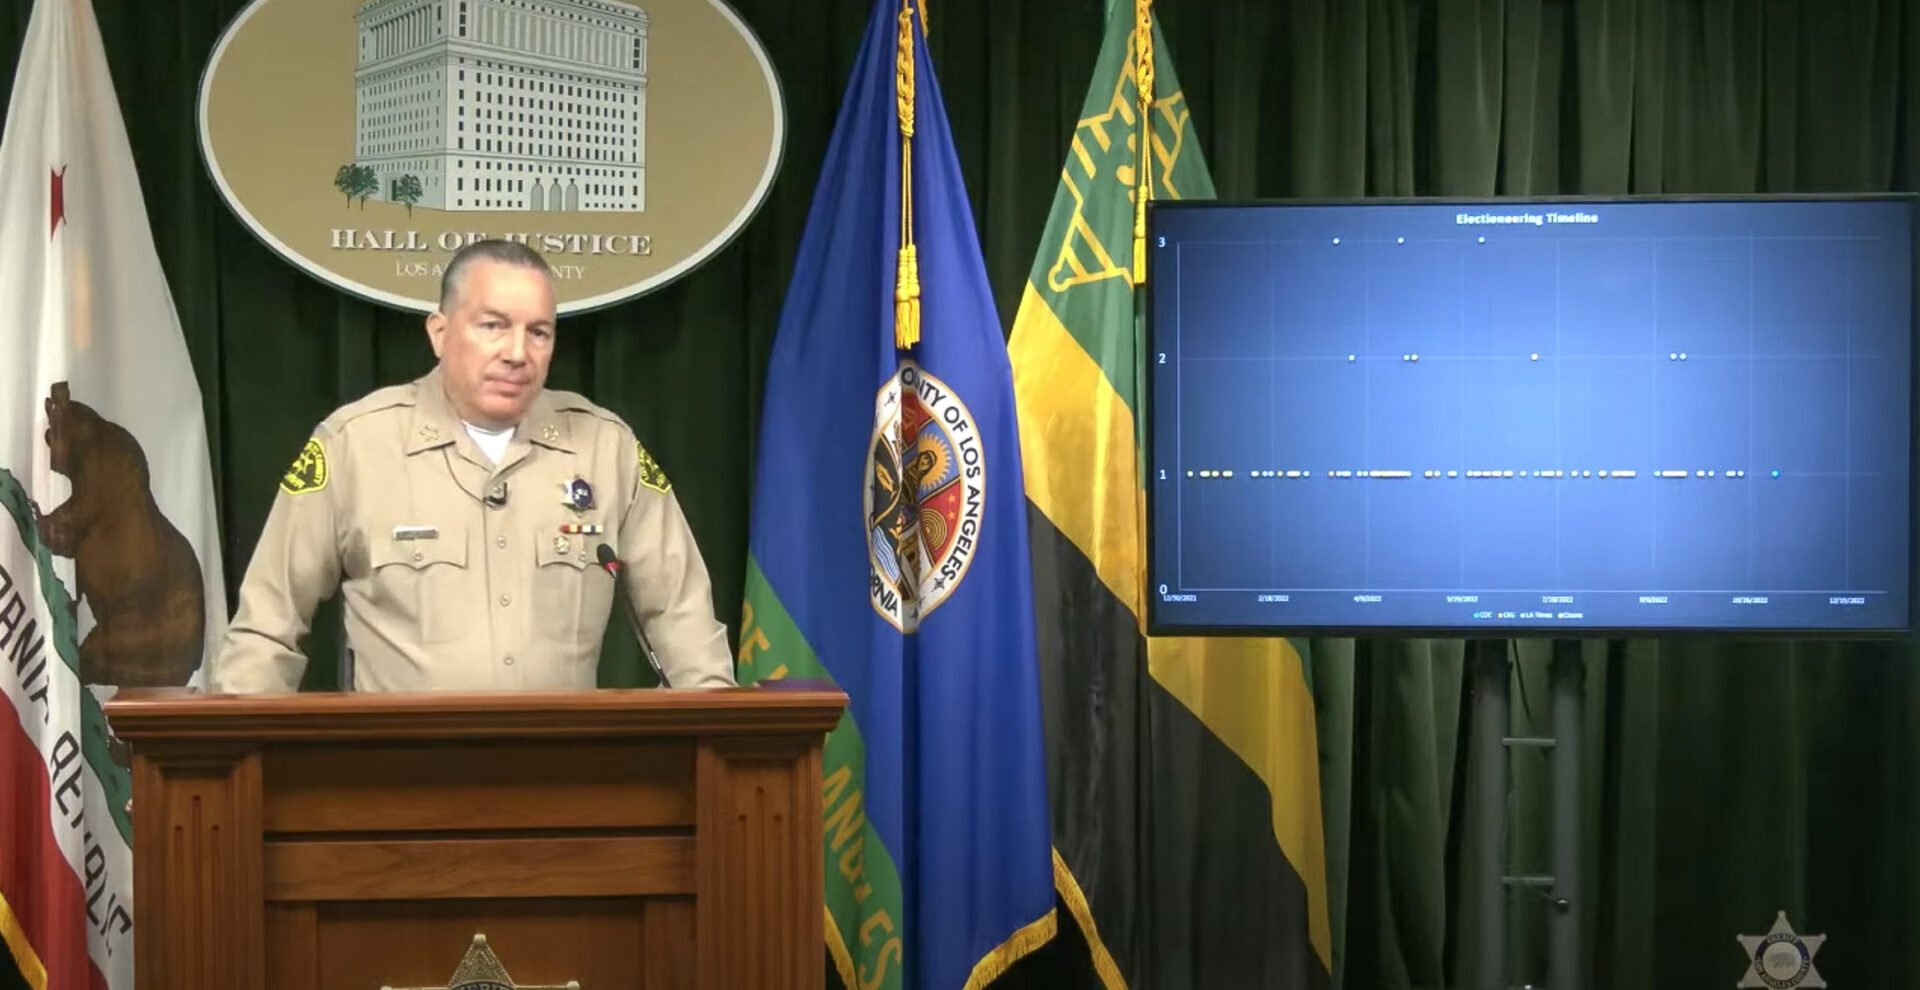 image of Sheriff Villanueva, standing behind a podium, a TV screen is off to his left shoulder showing a graph.